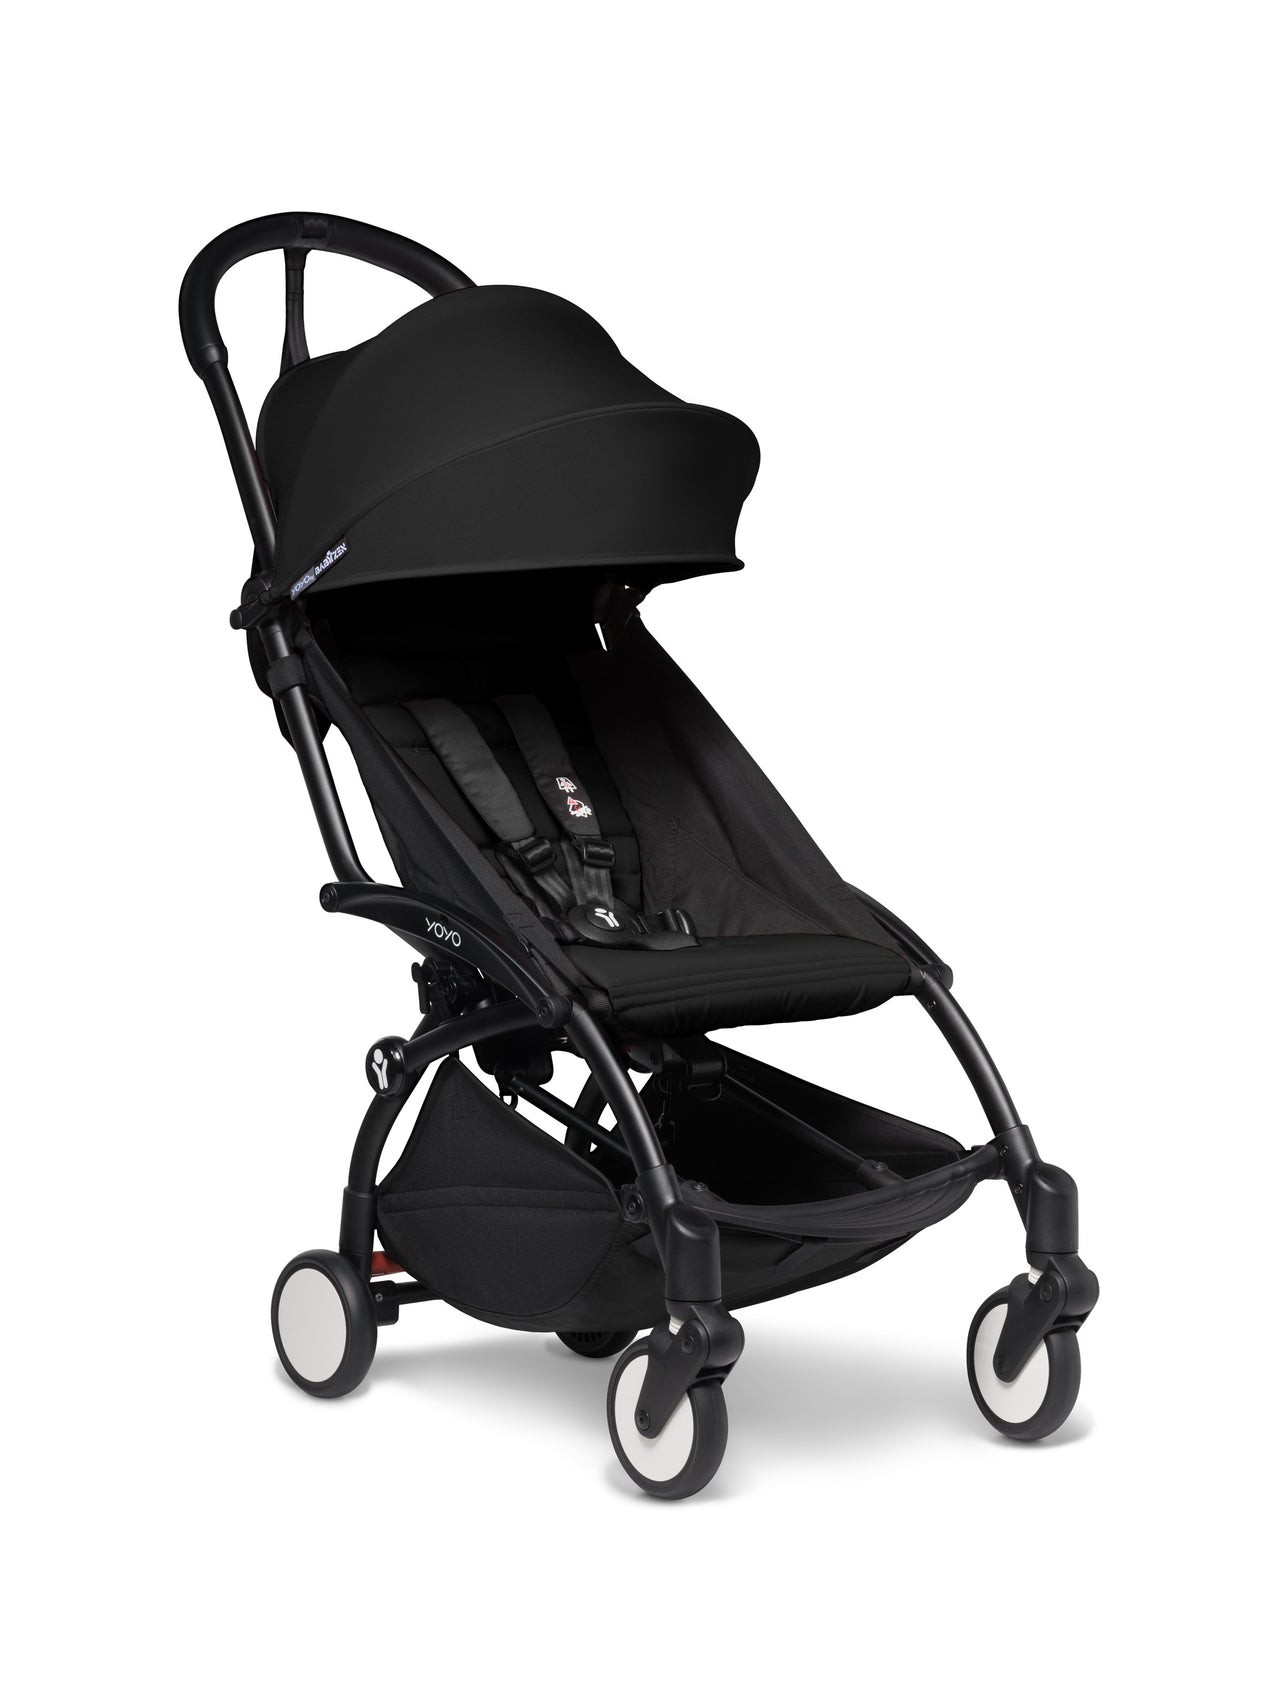 BABYZEN YOYO² (Black Frame) Complete with Bassinet  - Black with FREE BACKPACK